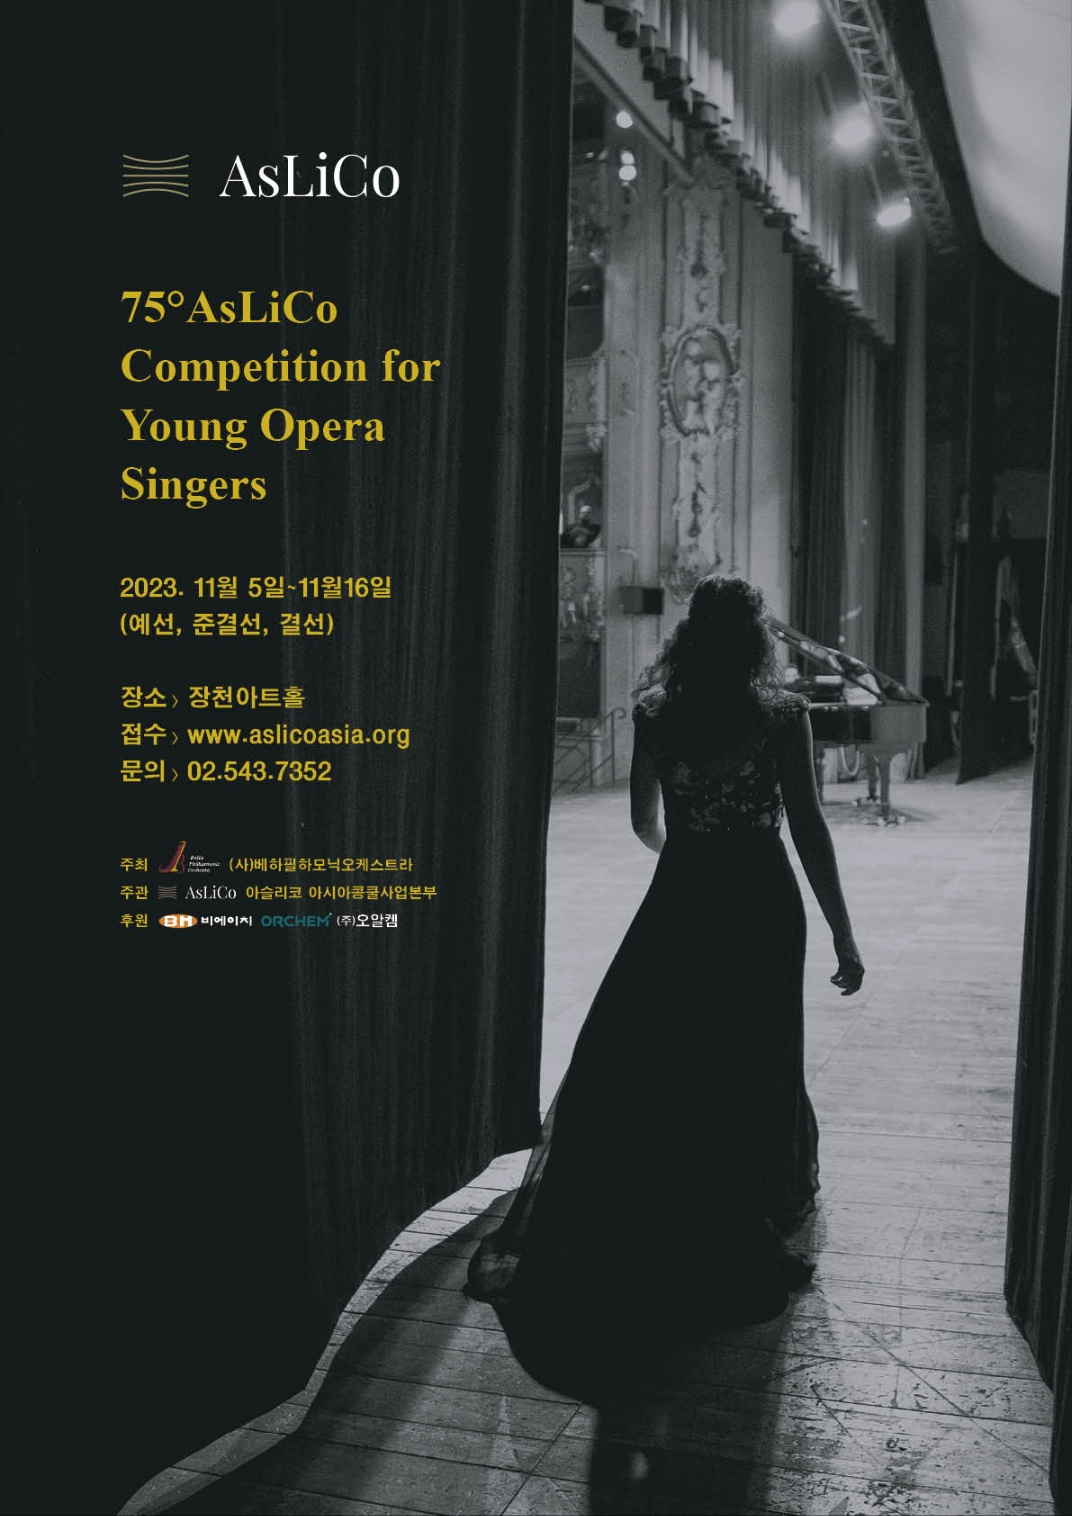 Poster for the 75th AsLiCo Competition for Young Opera Singers (AsLiCo)